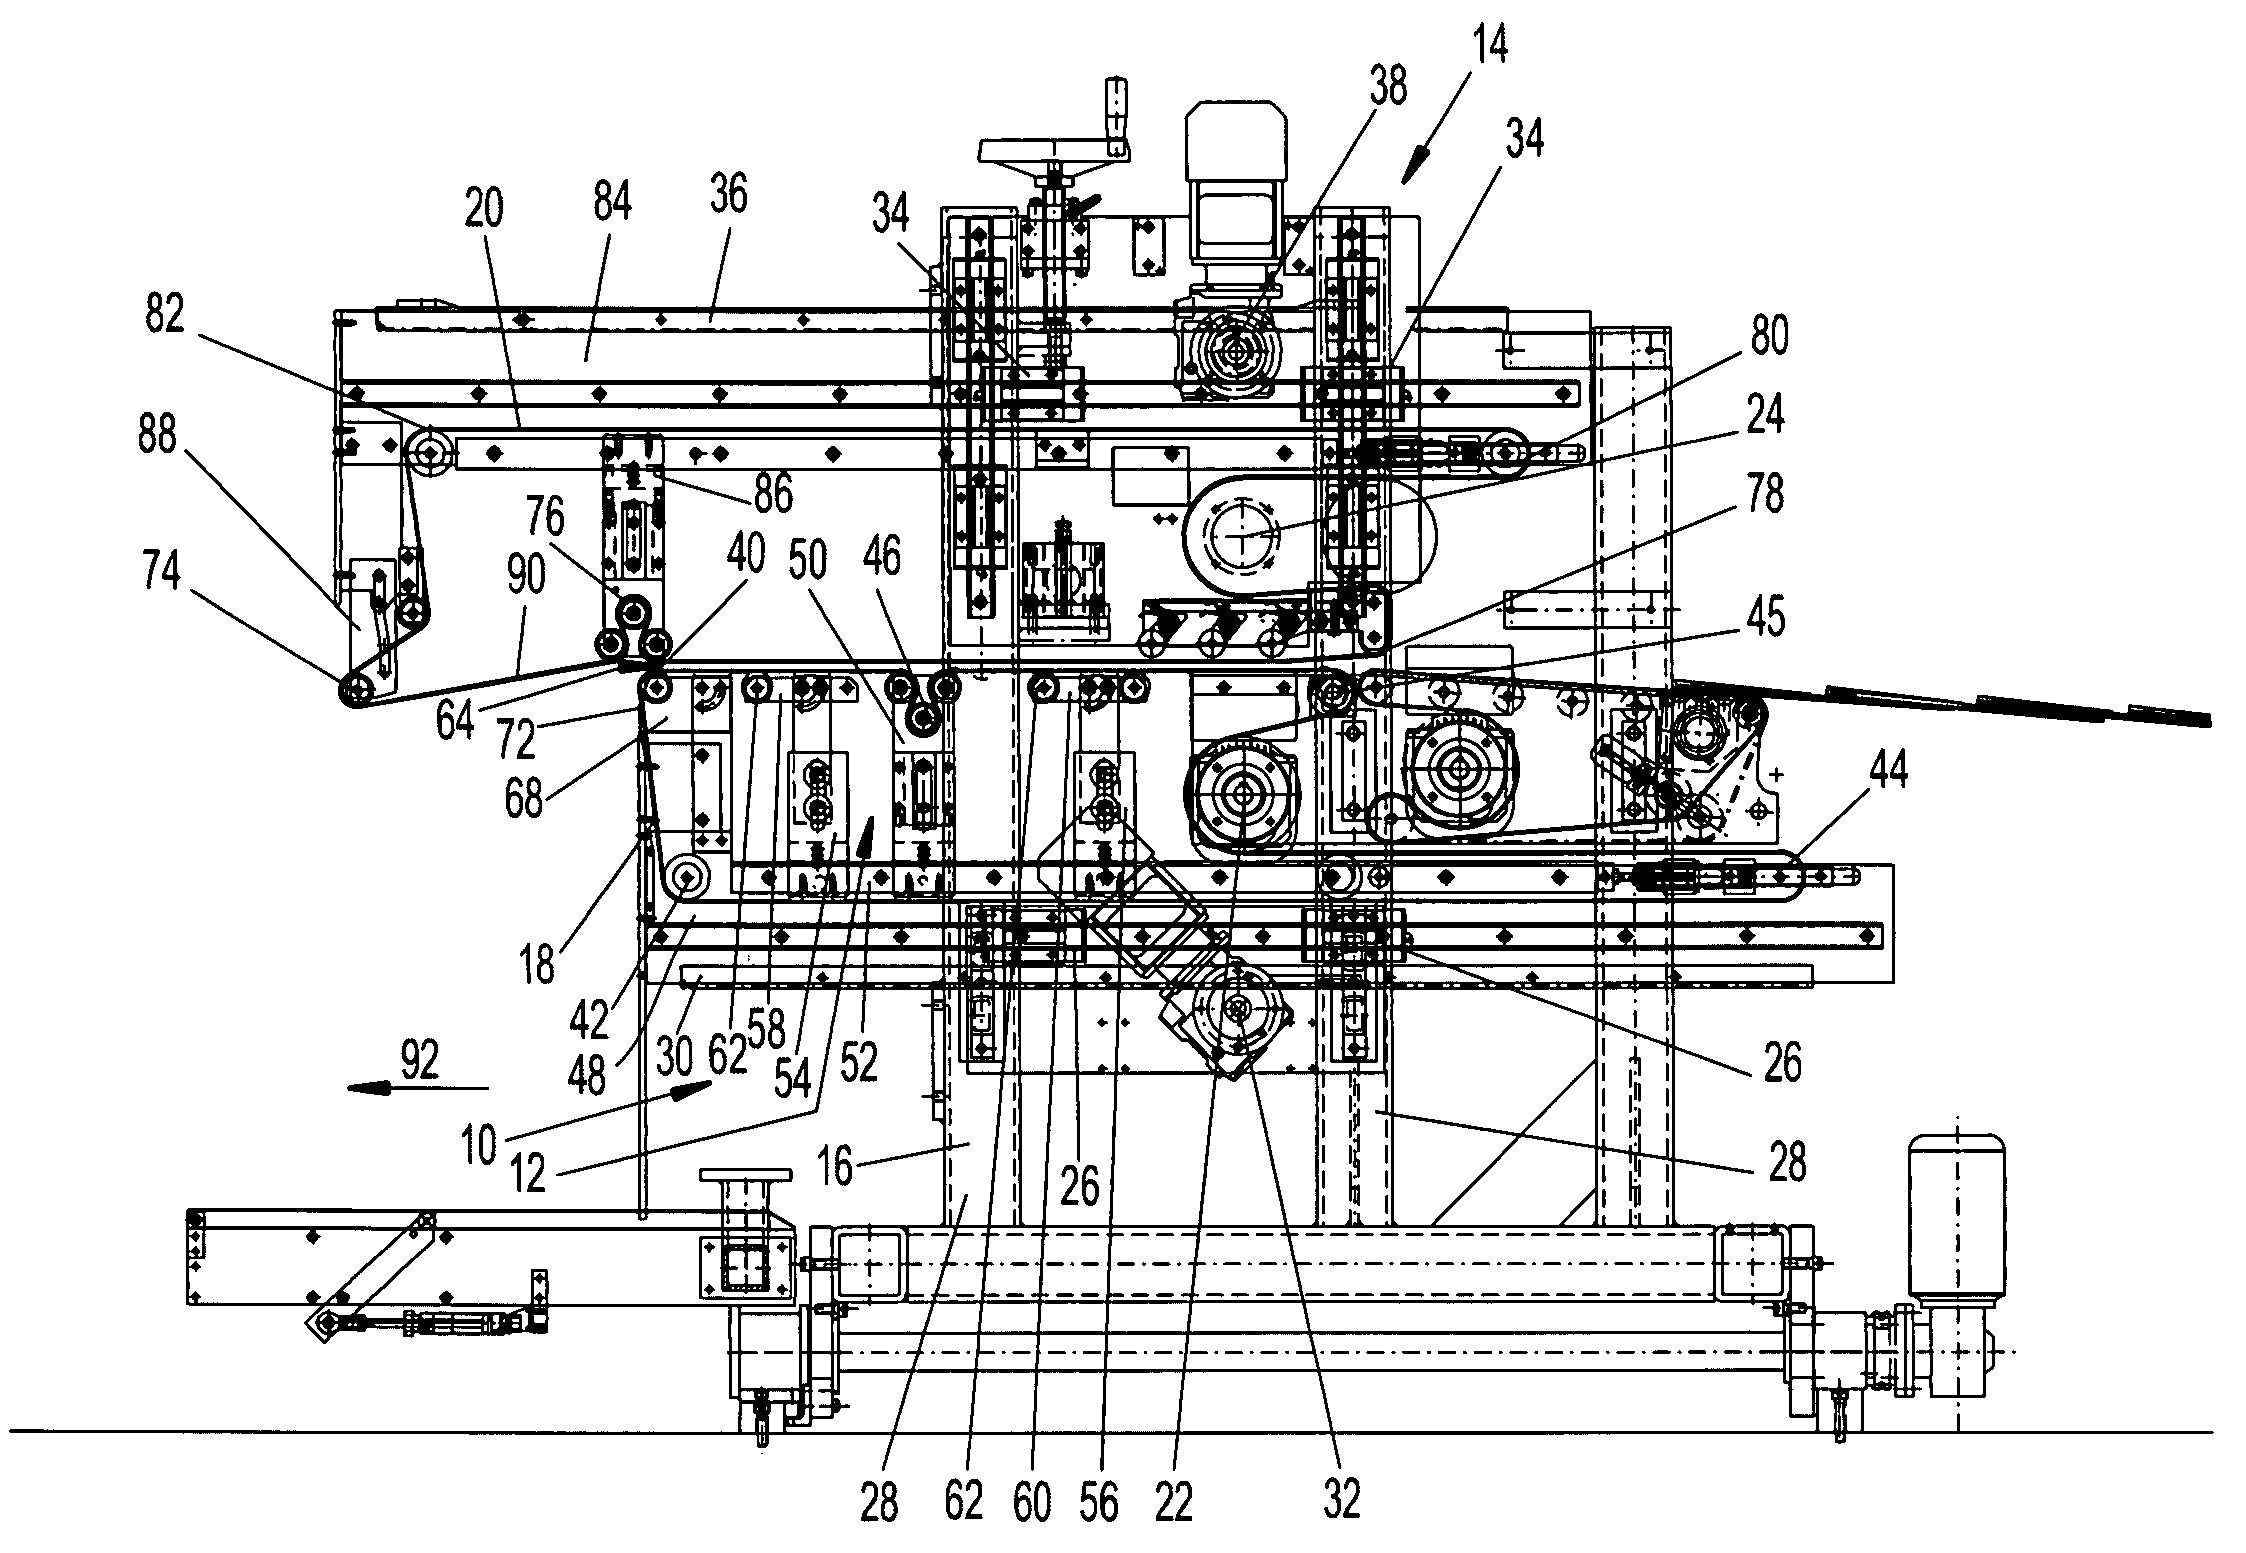 Device for stacking flat products